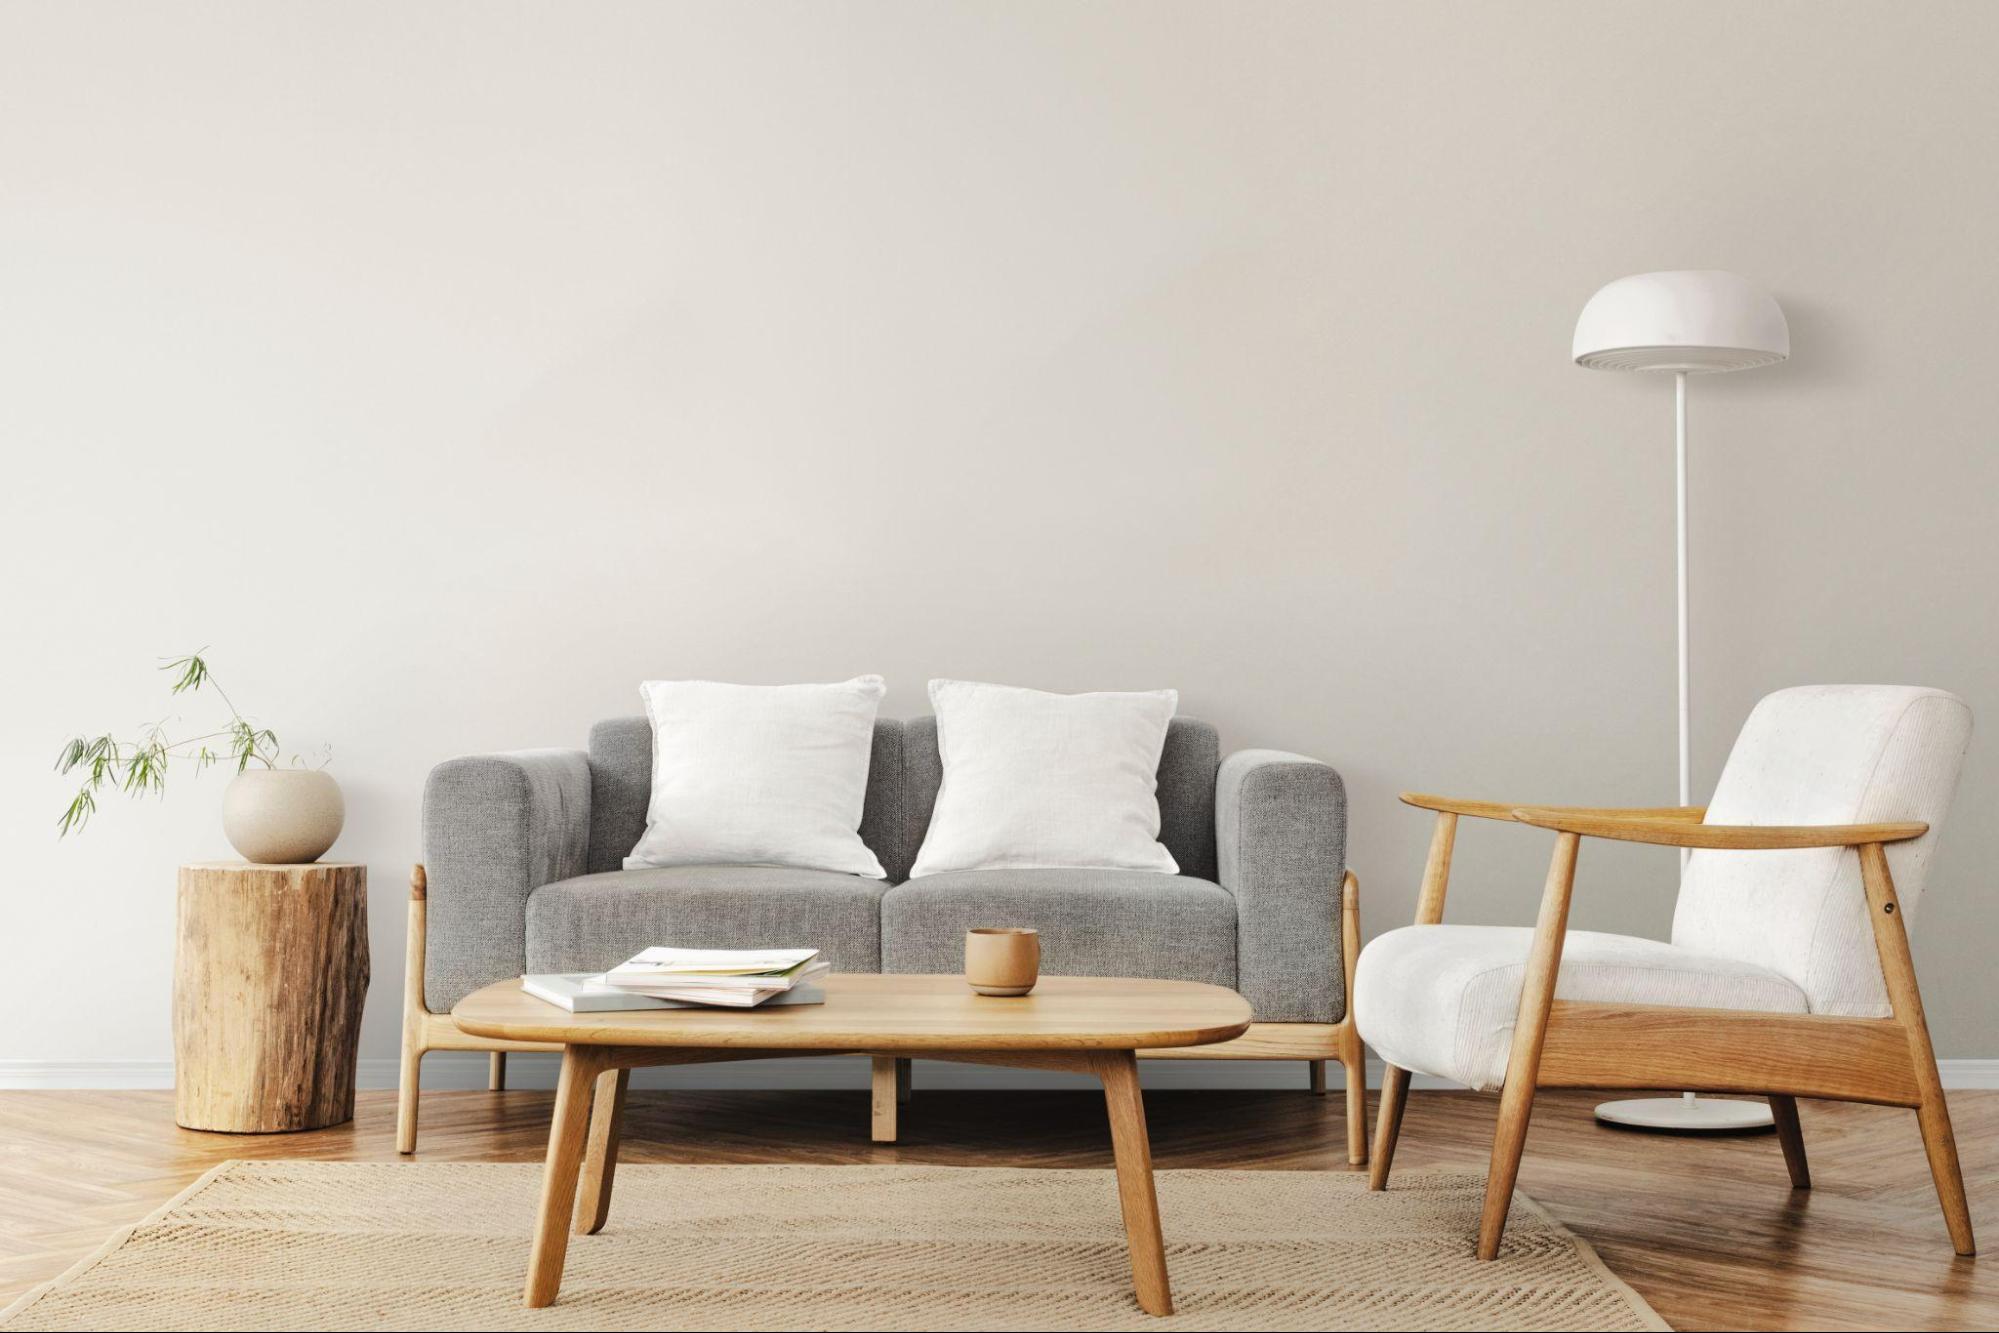 Organizing a Home with a Minimalist Concept, Learn How Here